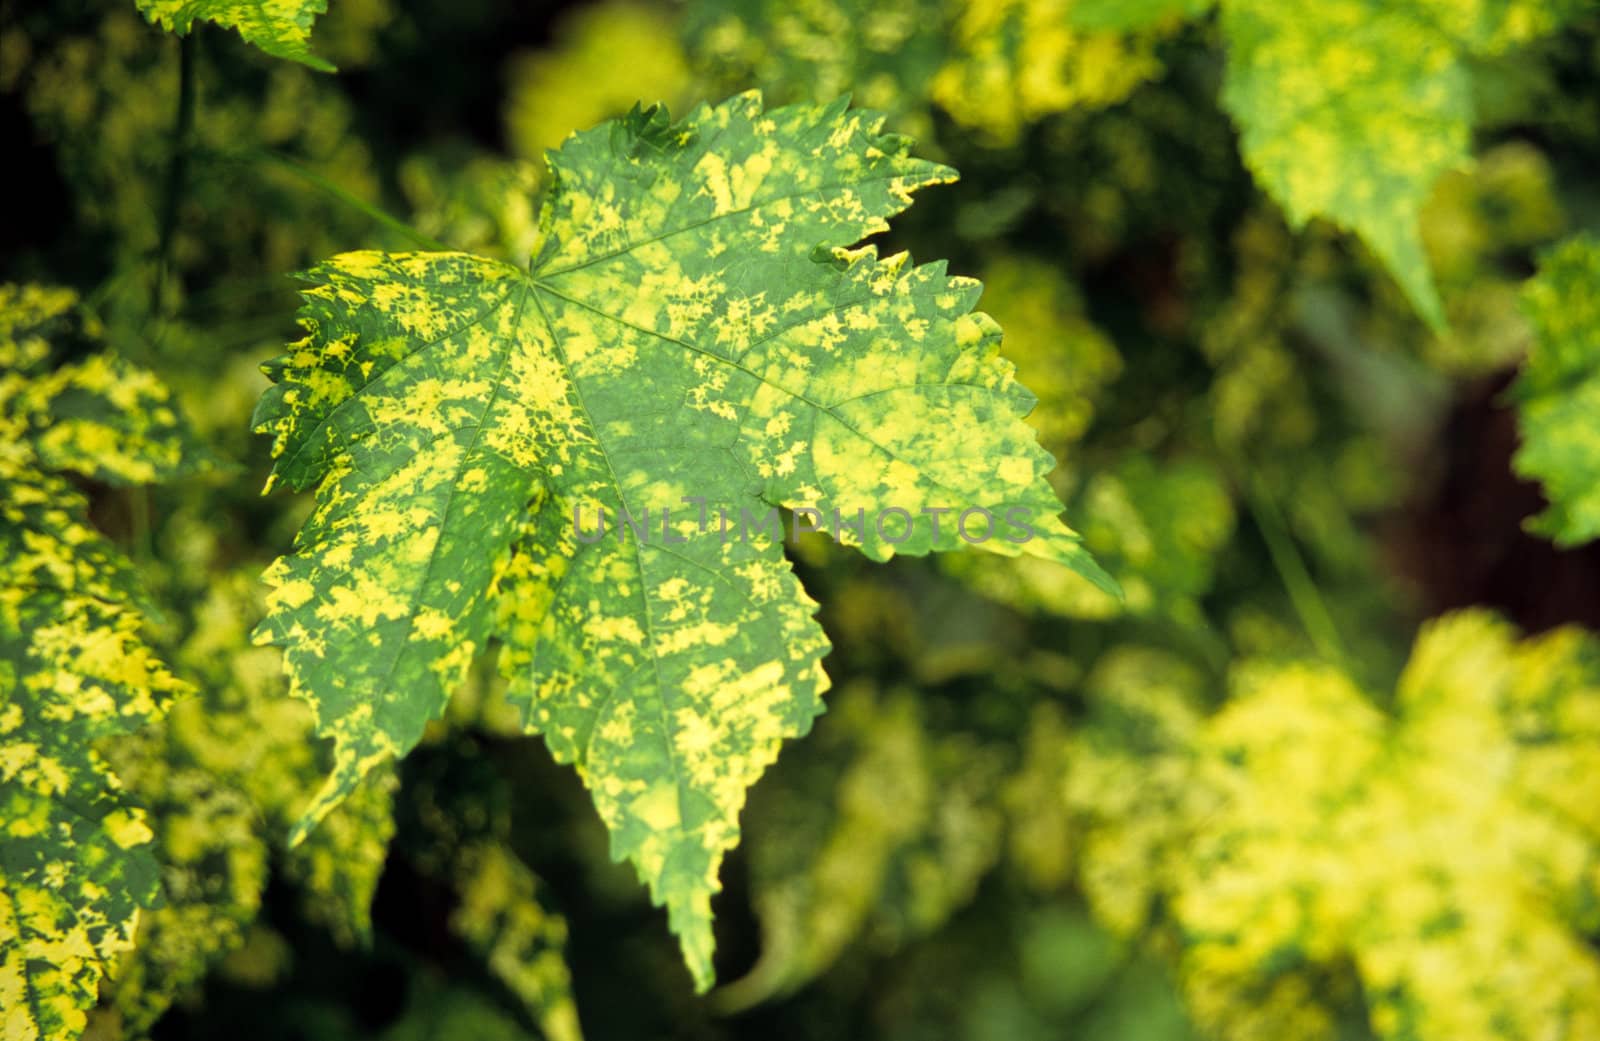 Green and Yellow Speckled Leaf by ACMPhoto